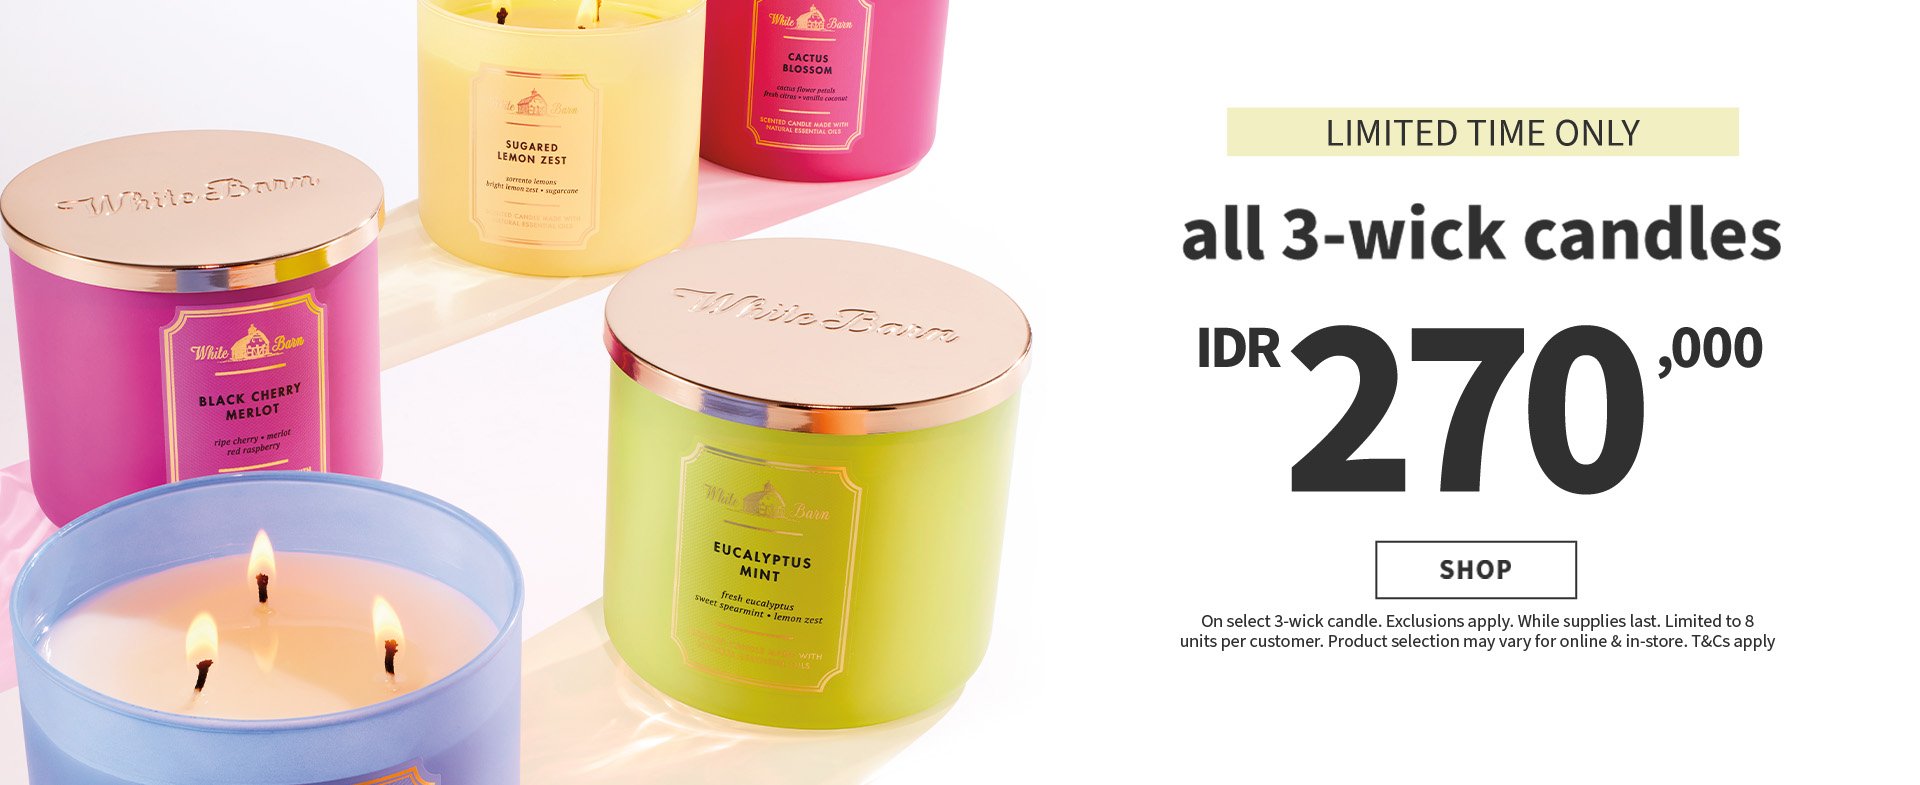 LIMITED TIME ONLY! ALL 3-WICK CANDLES $$